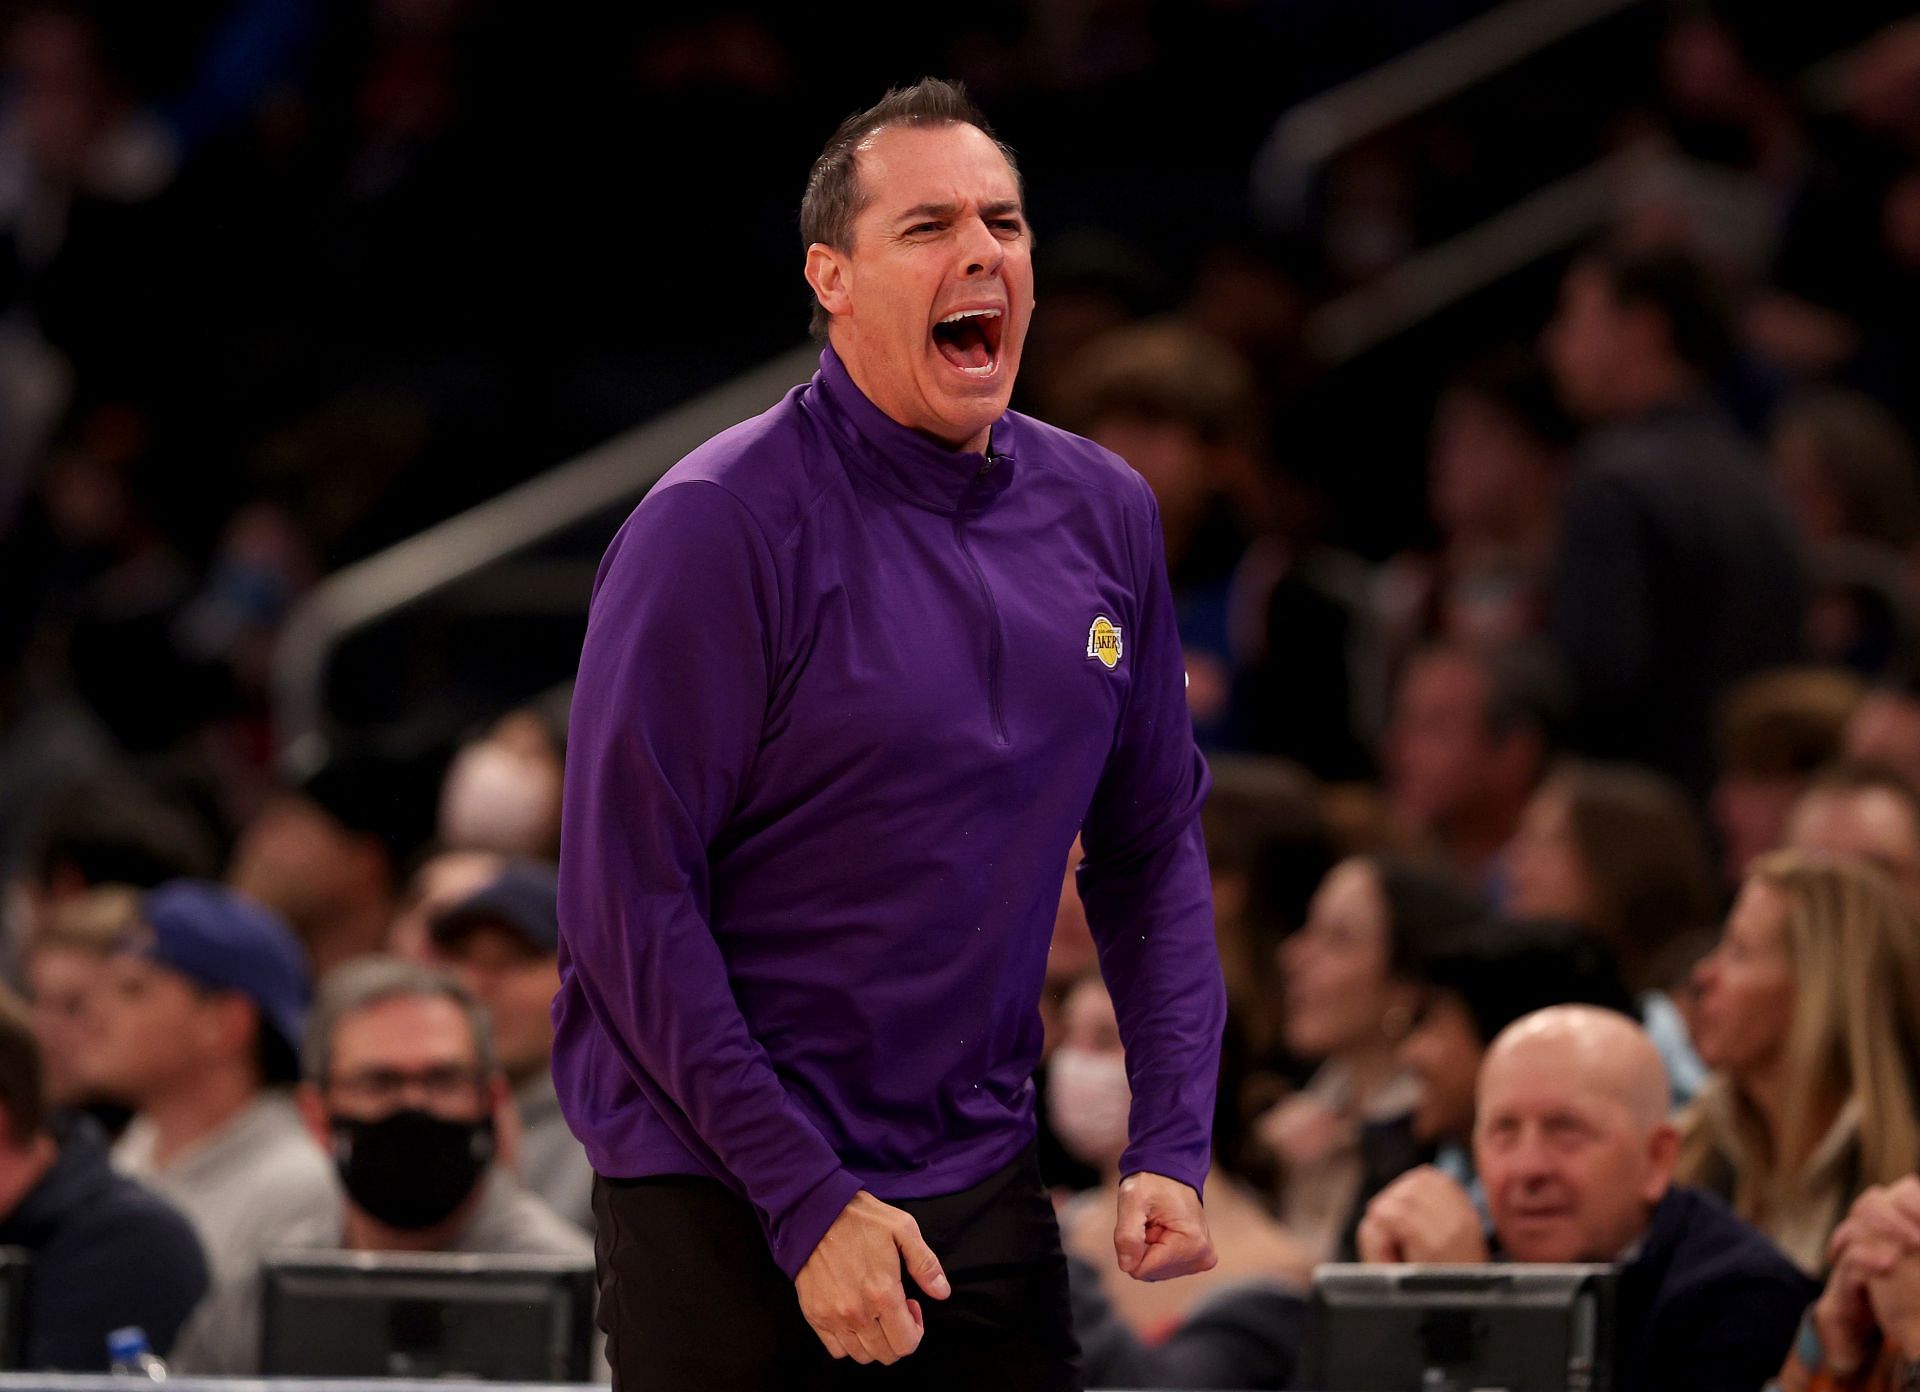 Los Angeles Lakers coach Frank Vogel is rumored to be on the hot seat